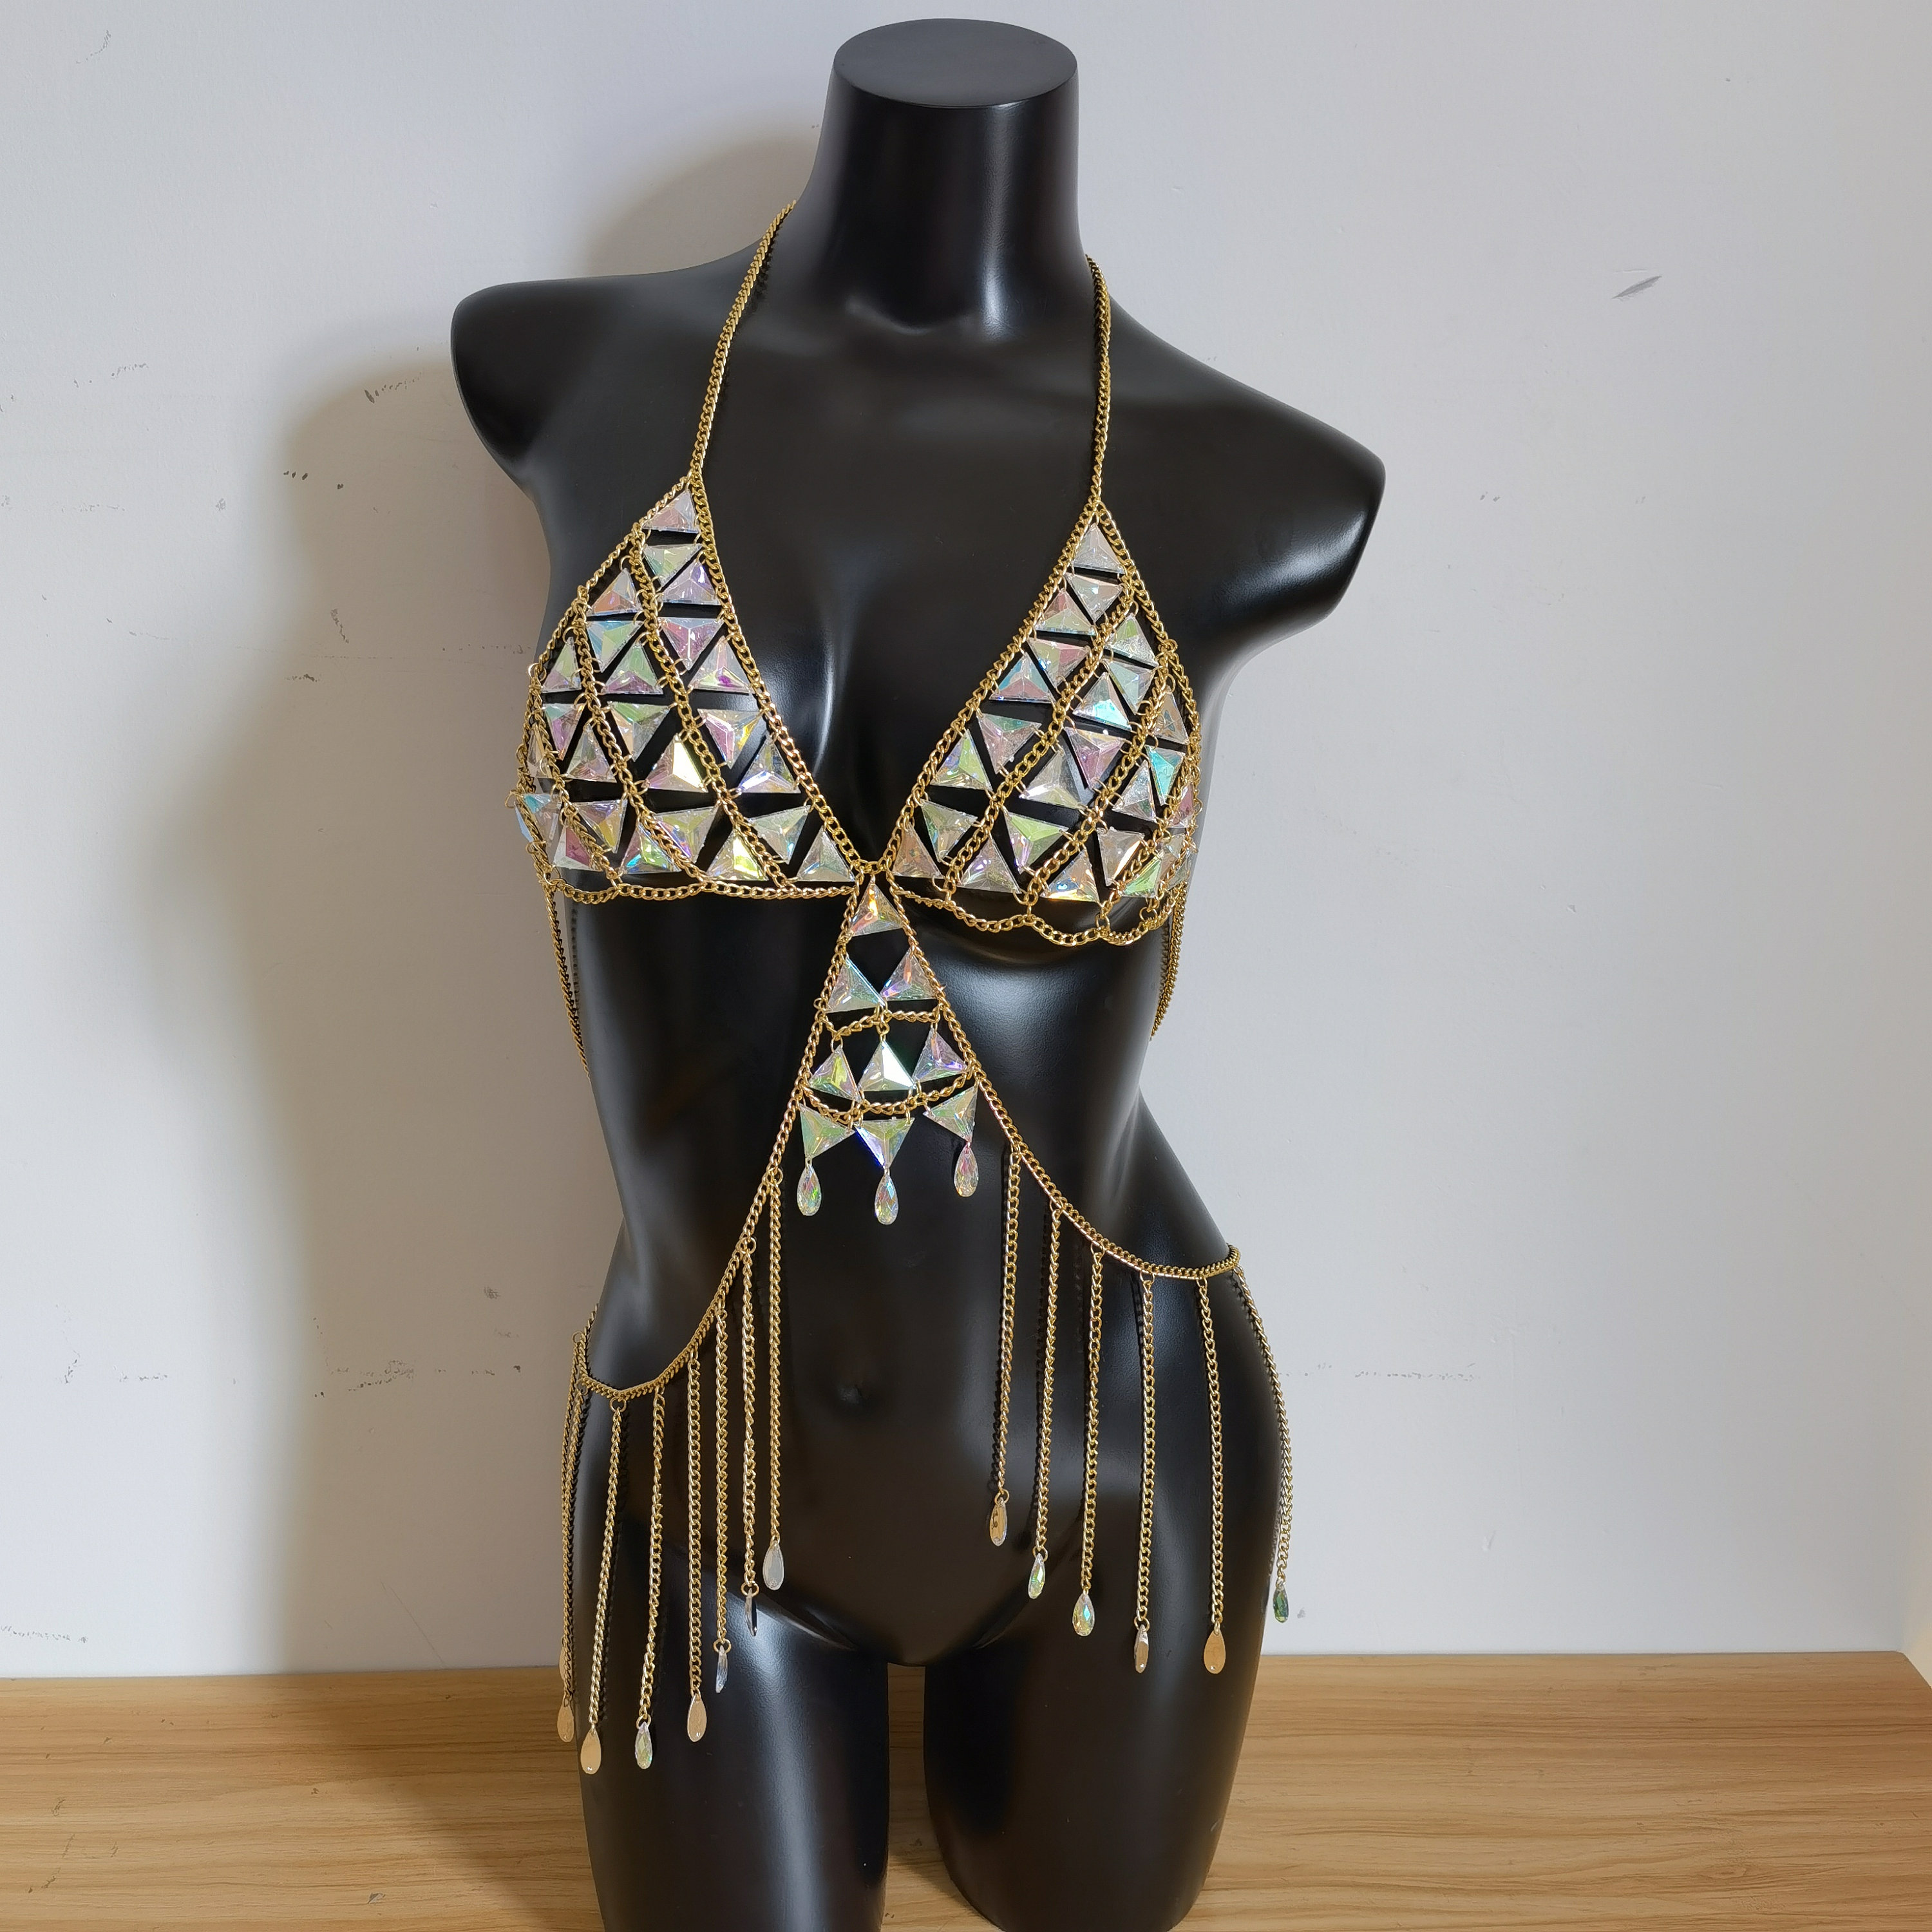 Temptress Gold & Rhinestone Body Chains / Body Jewelry for Lingerie Rave Burlesque Festivals